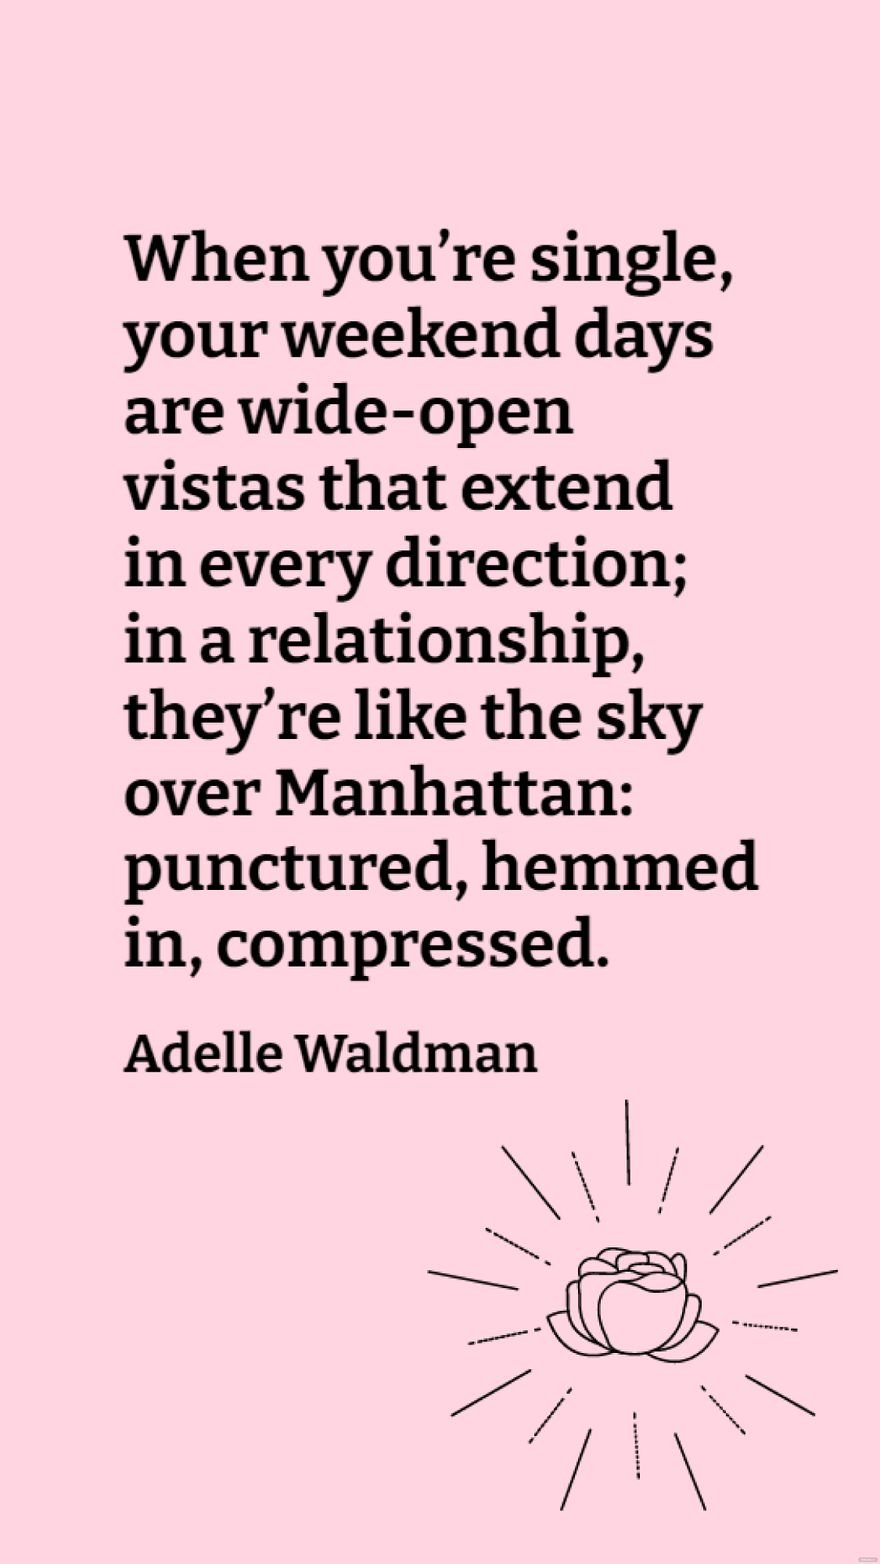 Free Adelle Waldman - When you’re single, your weekend days are wide-open vistas that extend in every direction; in a relationship, they’re like the sky over Manhattan: punctured, hemmed in, compressed. 